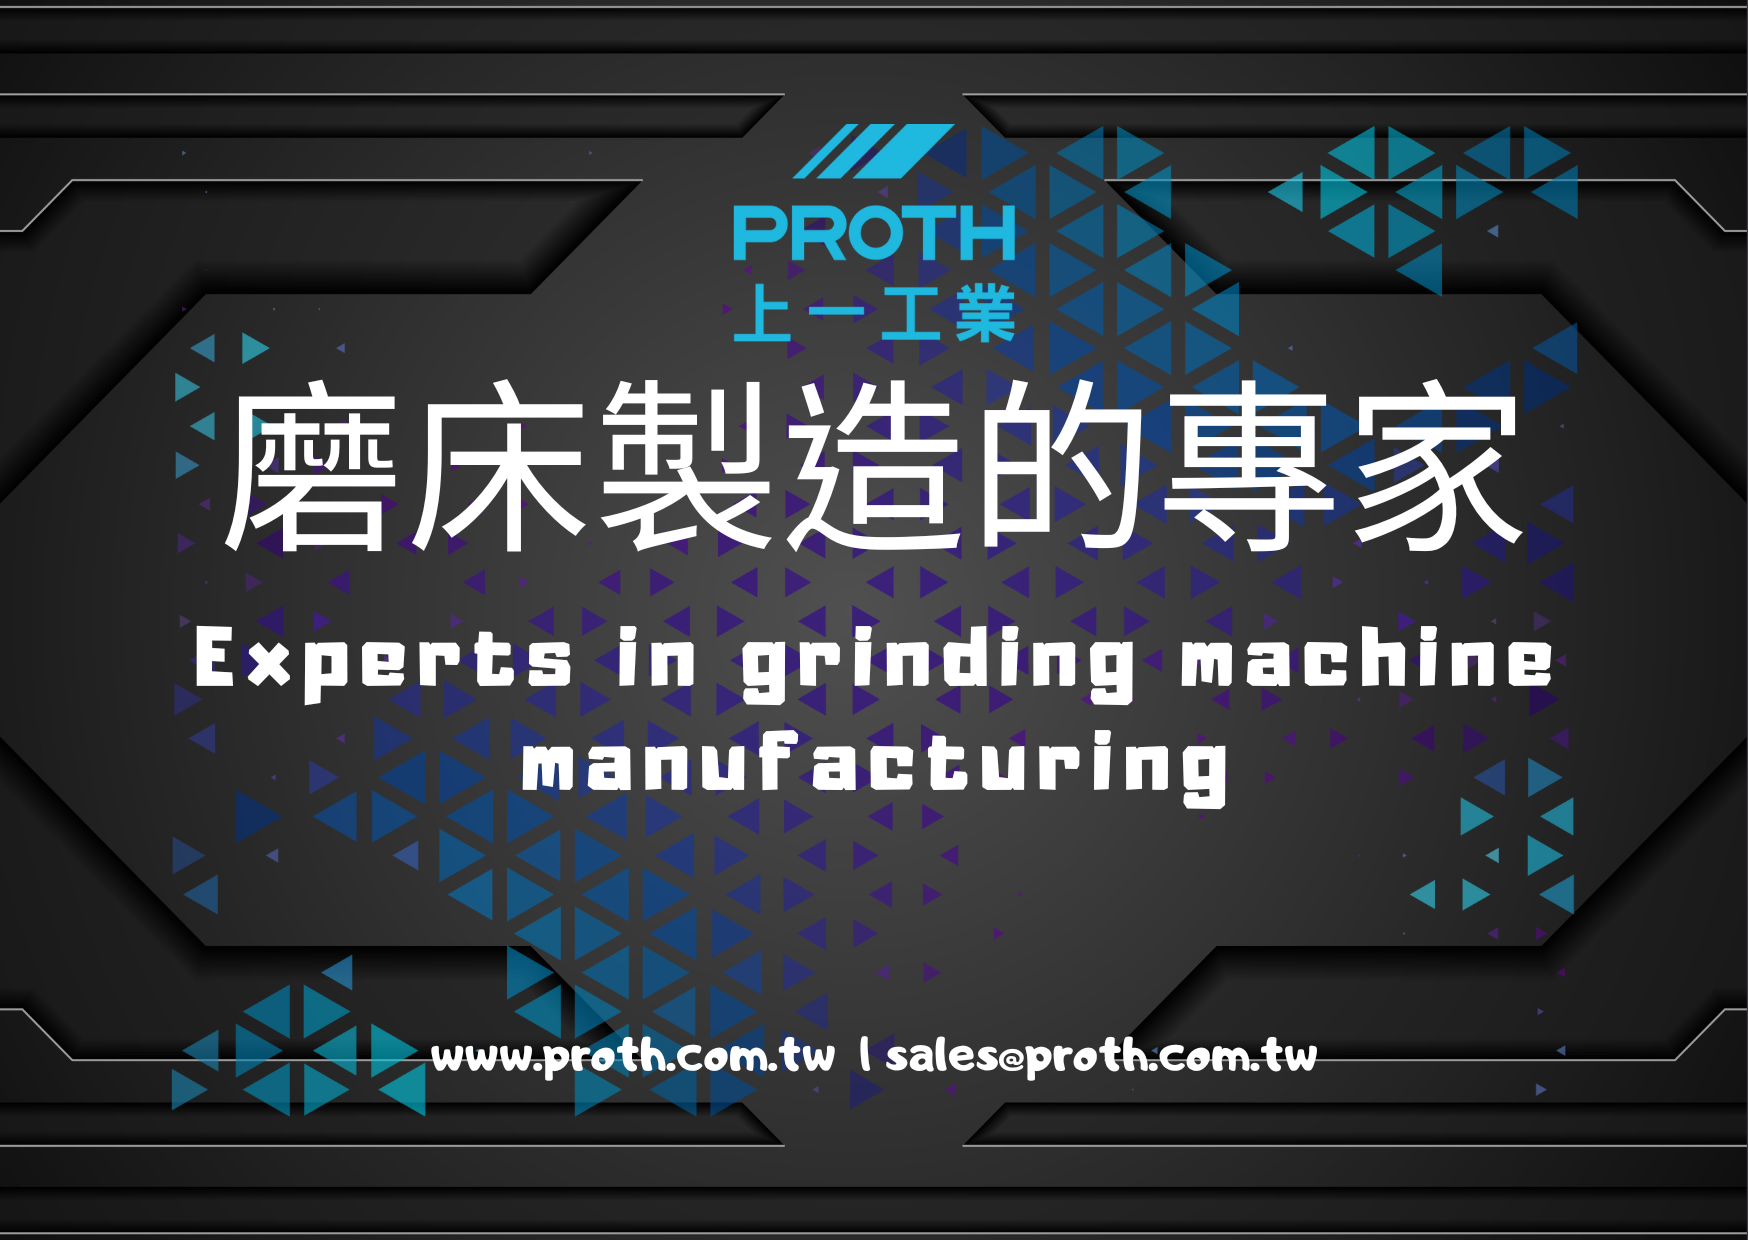 Video|PROTH - Experts in grinder manufacturing